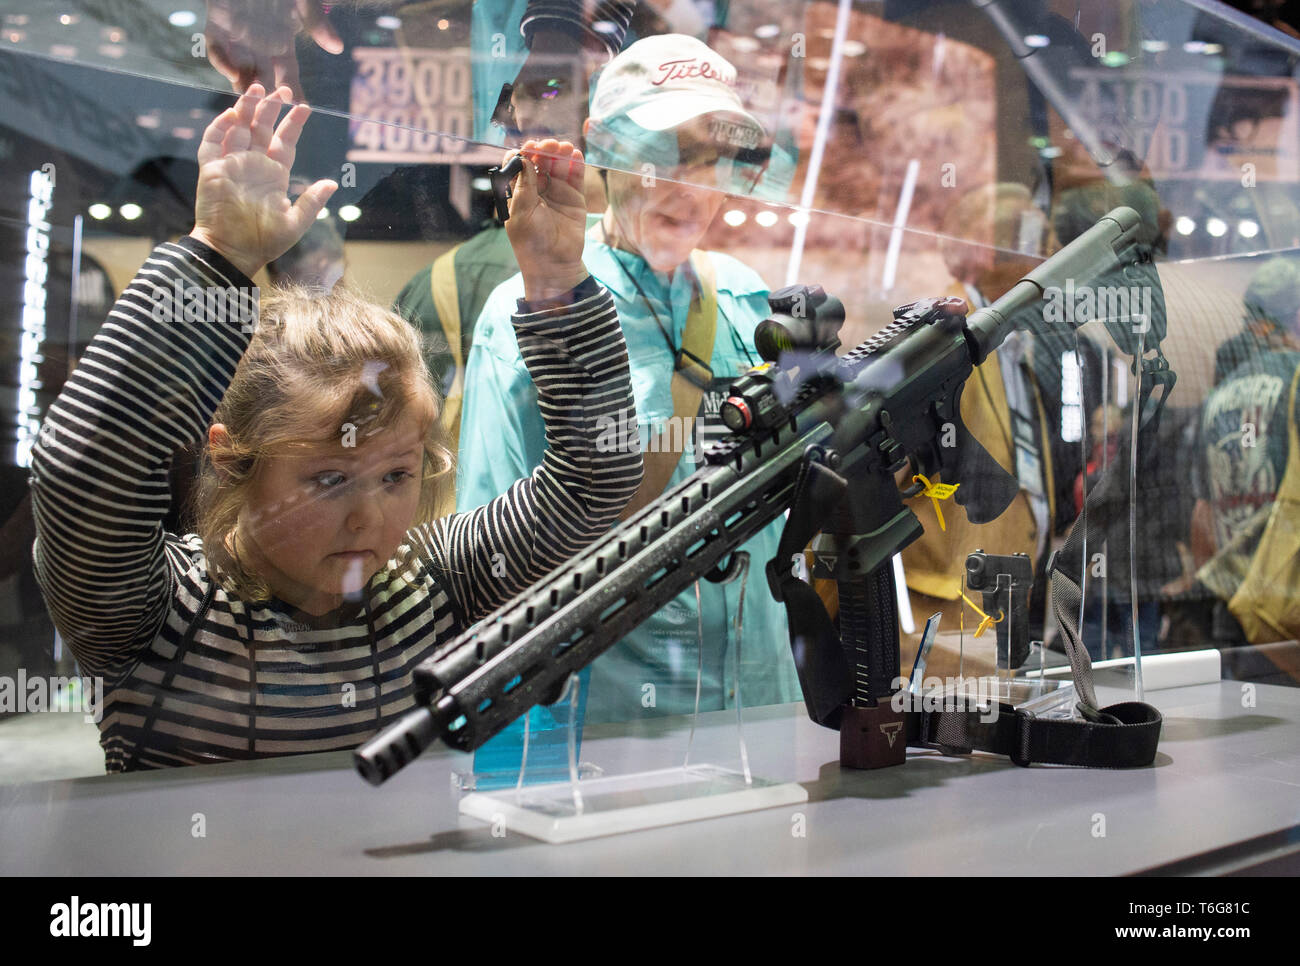 A young girl seen admiring a weapon by Sig Saur that will be featured in  the upcoming John Wick film during an exhibition. NRA members and leaders  gather in Indianapolis, Indiana for